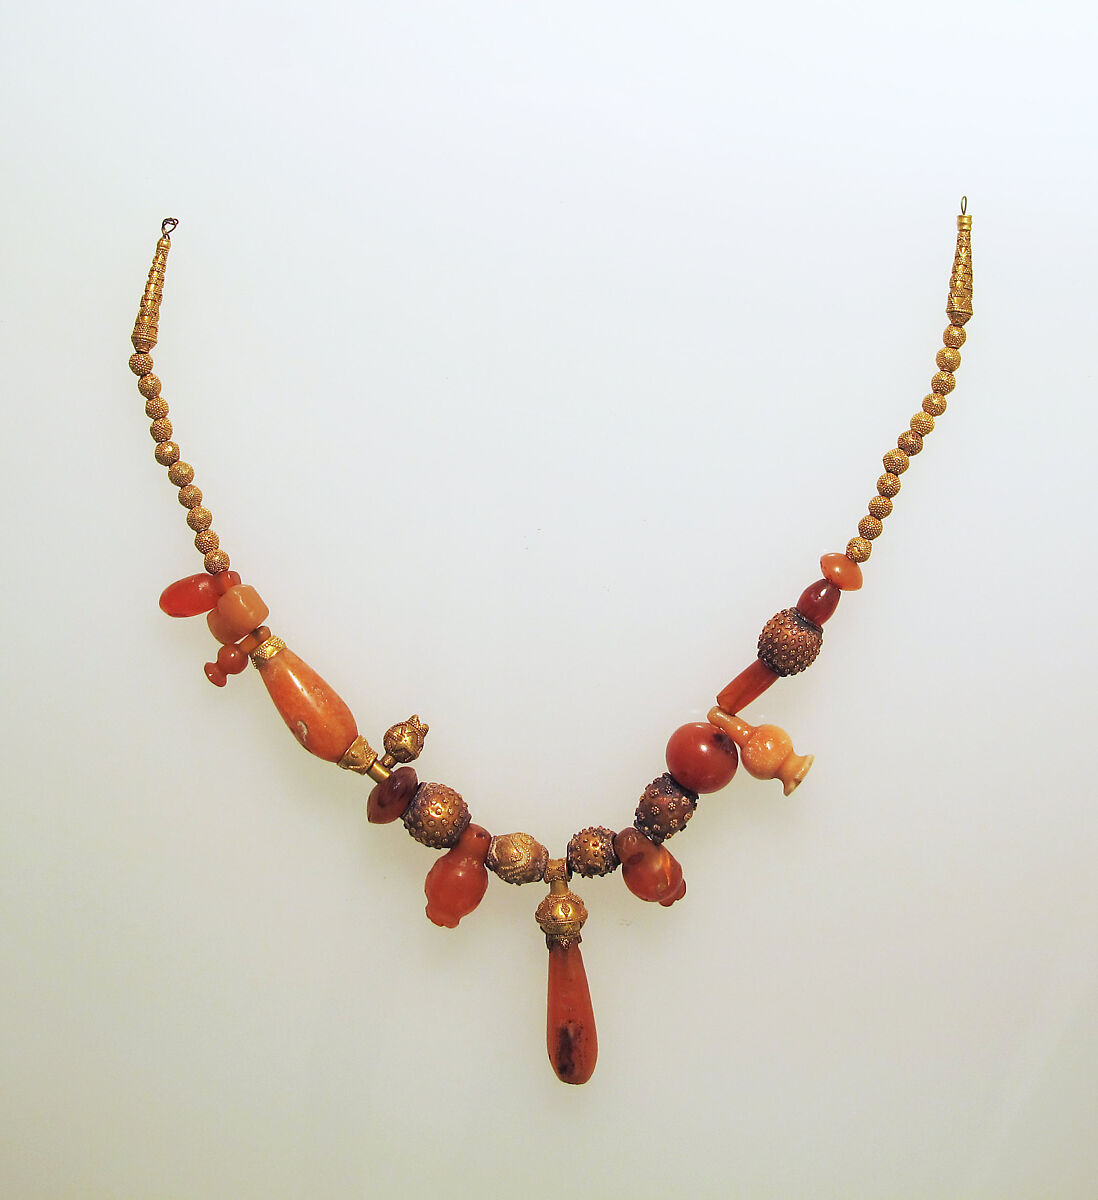 Necklace of assorted gold and carnelian beads, with gold terminals and carnelian pendant, Gold, Cypriot 